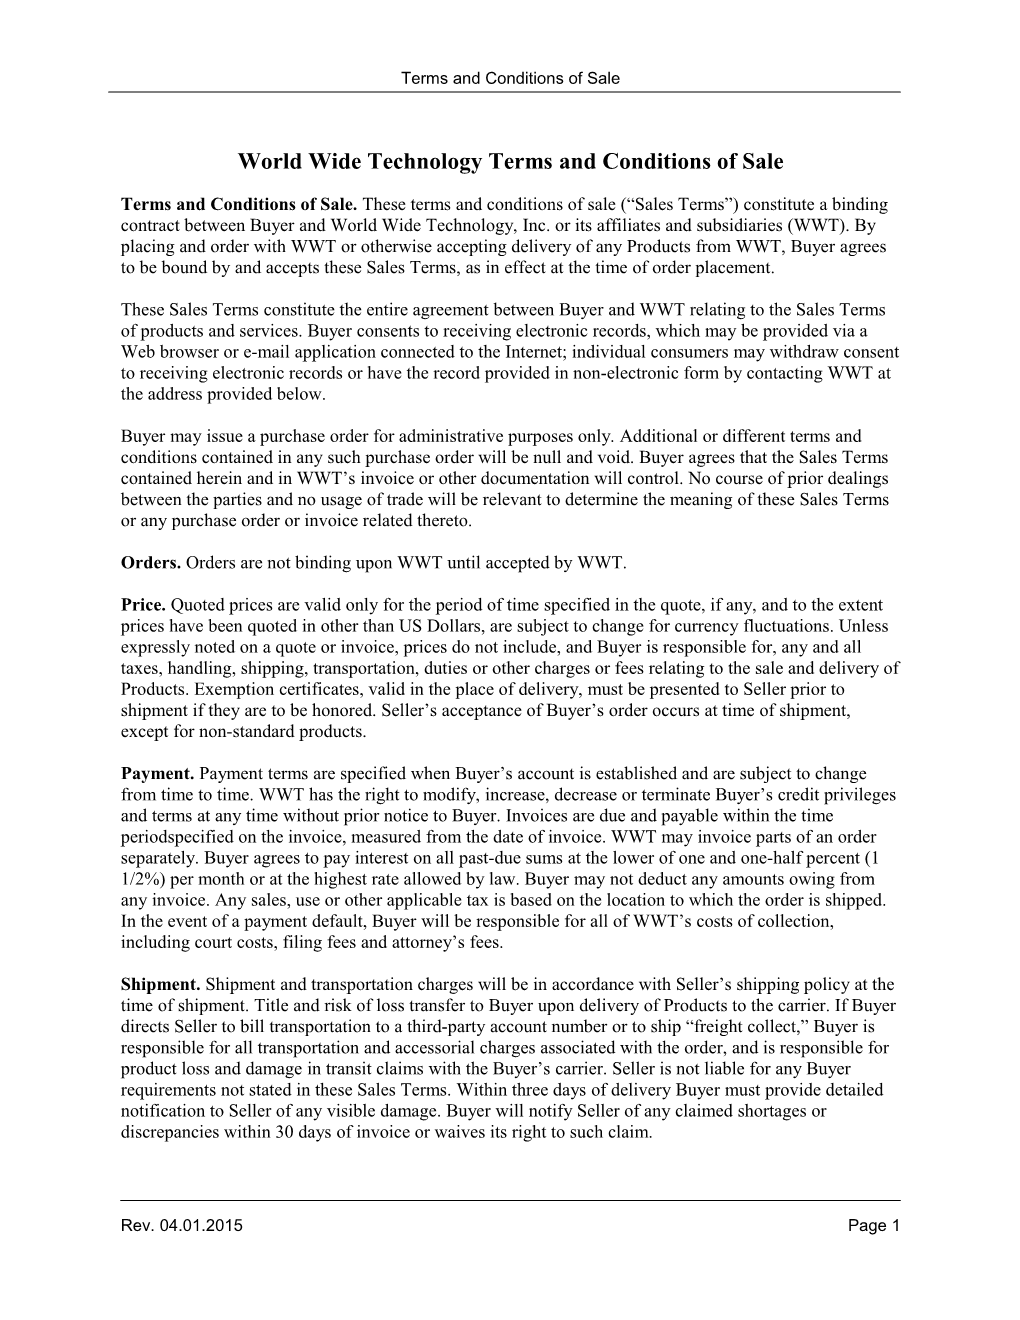 World Wide Technology ("WWT") Terms And Conditions Of Sale